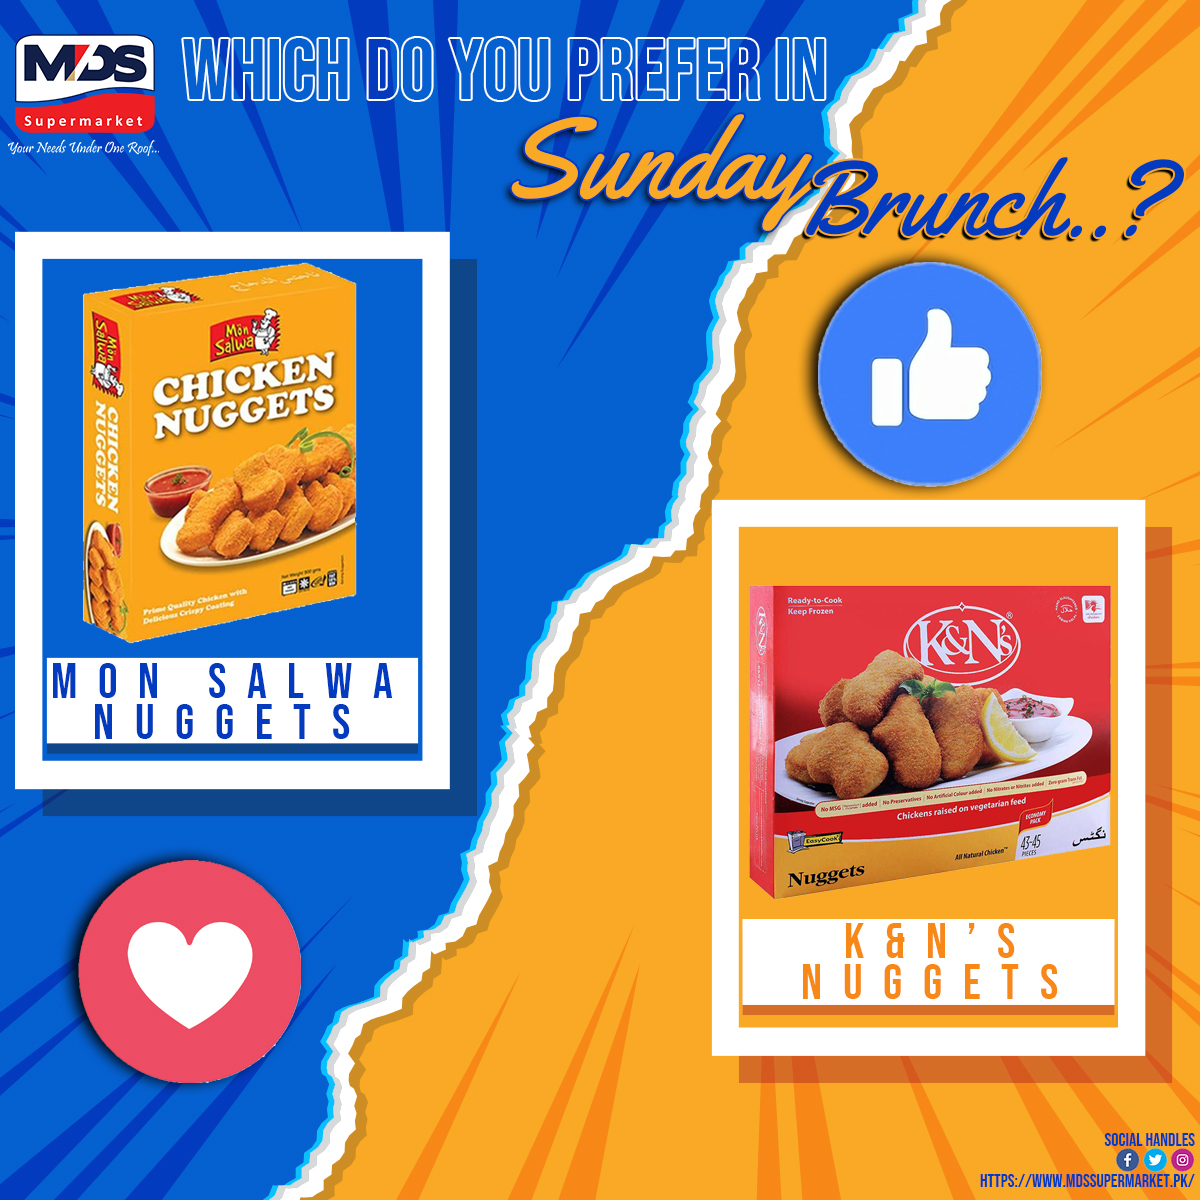 Sunday Brunch: Which one do you prefer? 🍗 Mon Salwa Nuggets or K&N's Nuggets? Let us know in the comments! 👇 

📍 Branch 1: Toghi Road Quetta
📞 Phone: (081-2823444)
📍 Branch 2: Quarry Road, Quetta
📞 Phone: (081-2823420)

#SundayBrunch #Nuggets #MDSupermarket #Quetta #Brunch